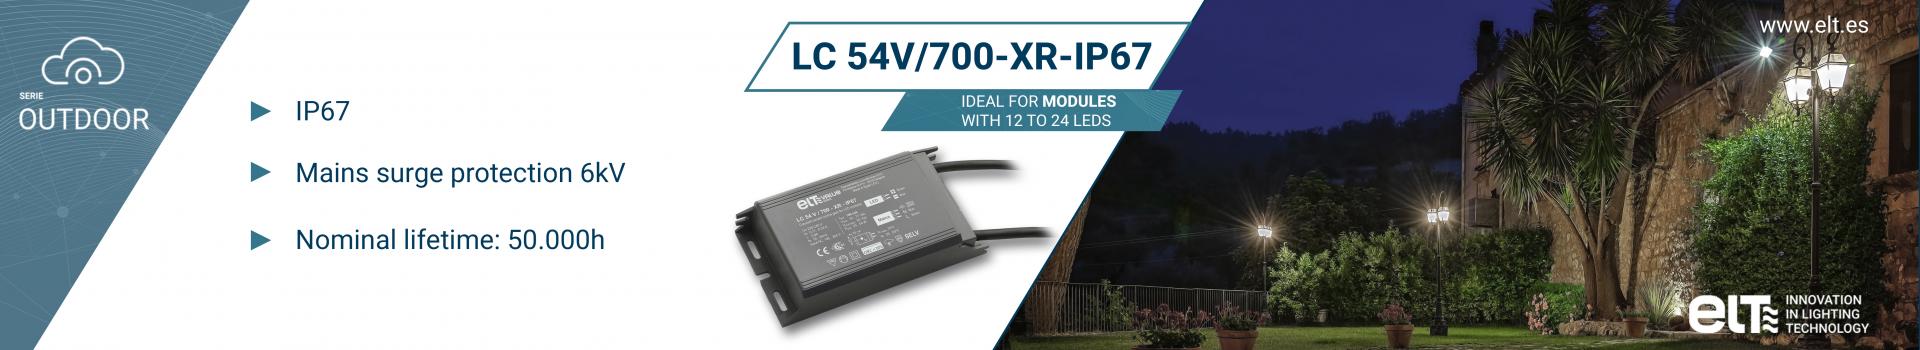 LC-XR-IP67